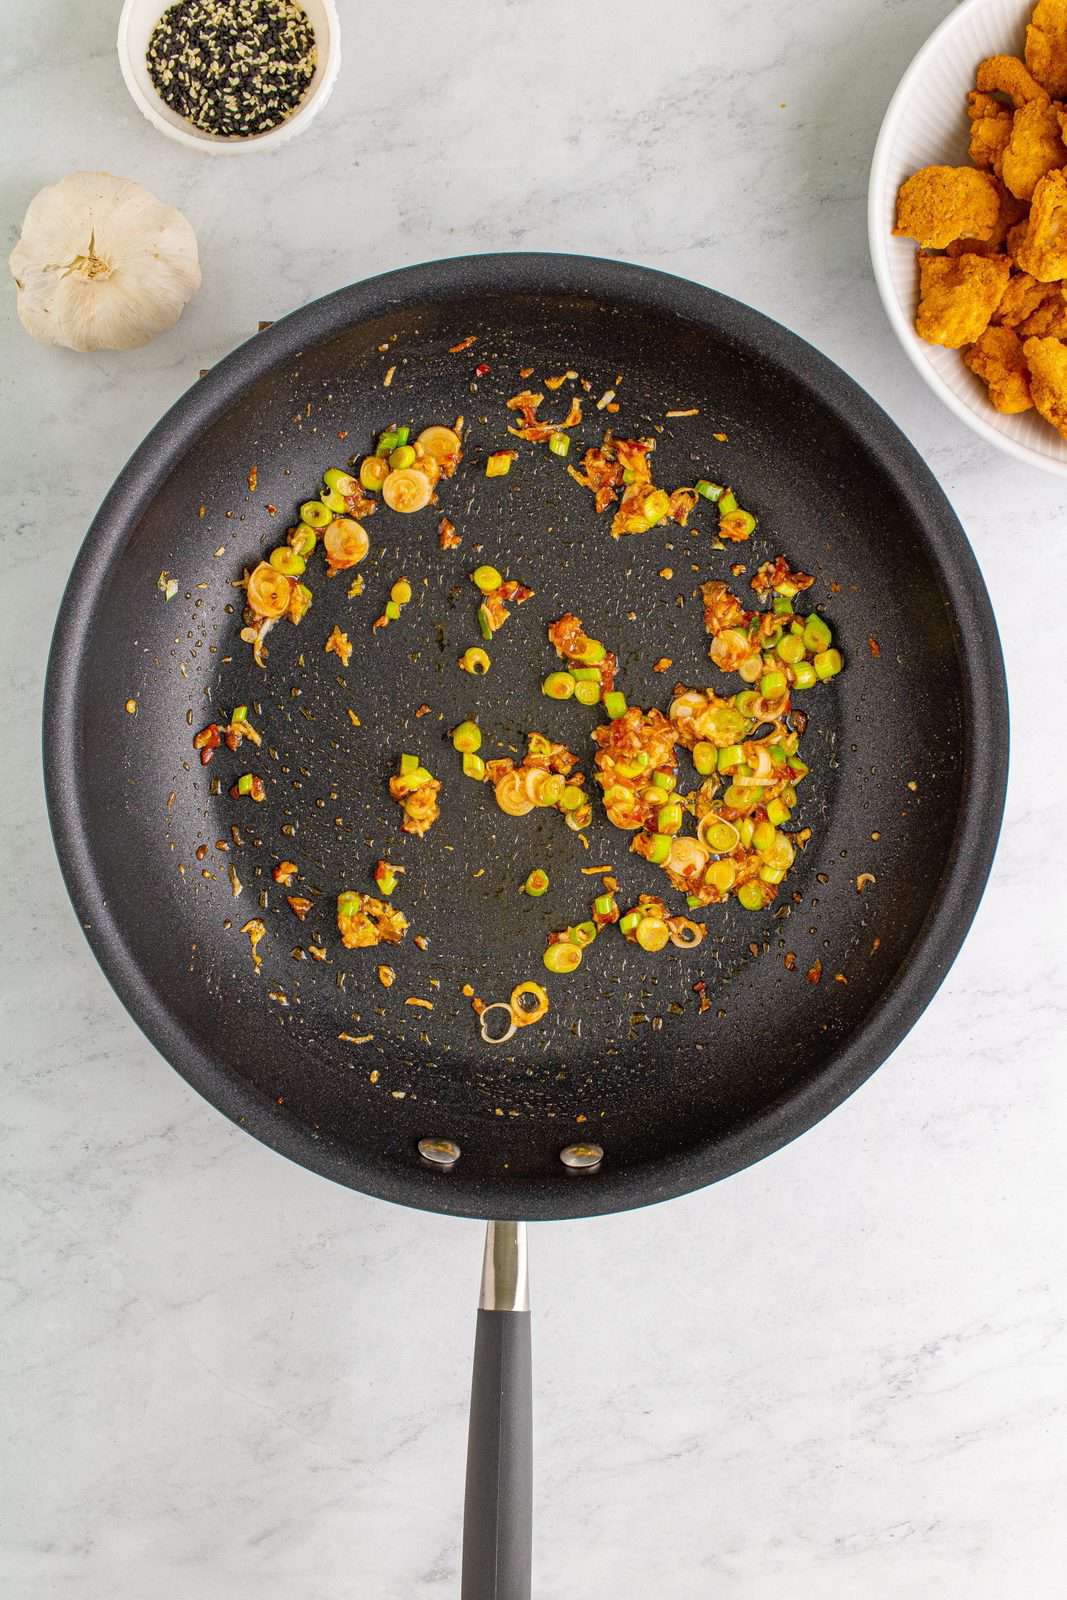 Vegetable oil, scallions, garlic, and chili paste added to skillet and sauteed.